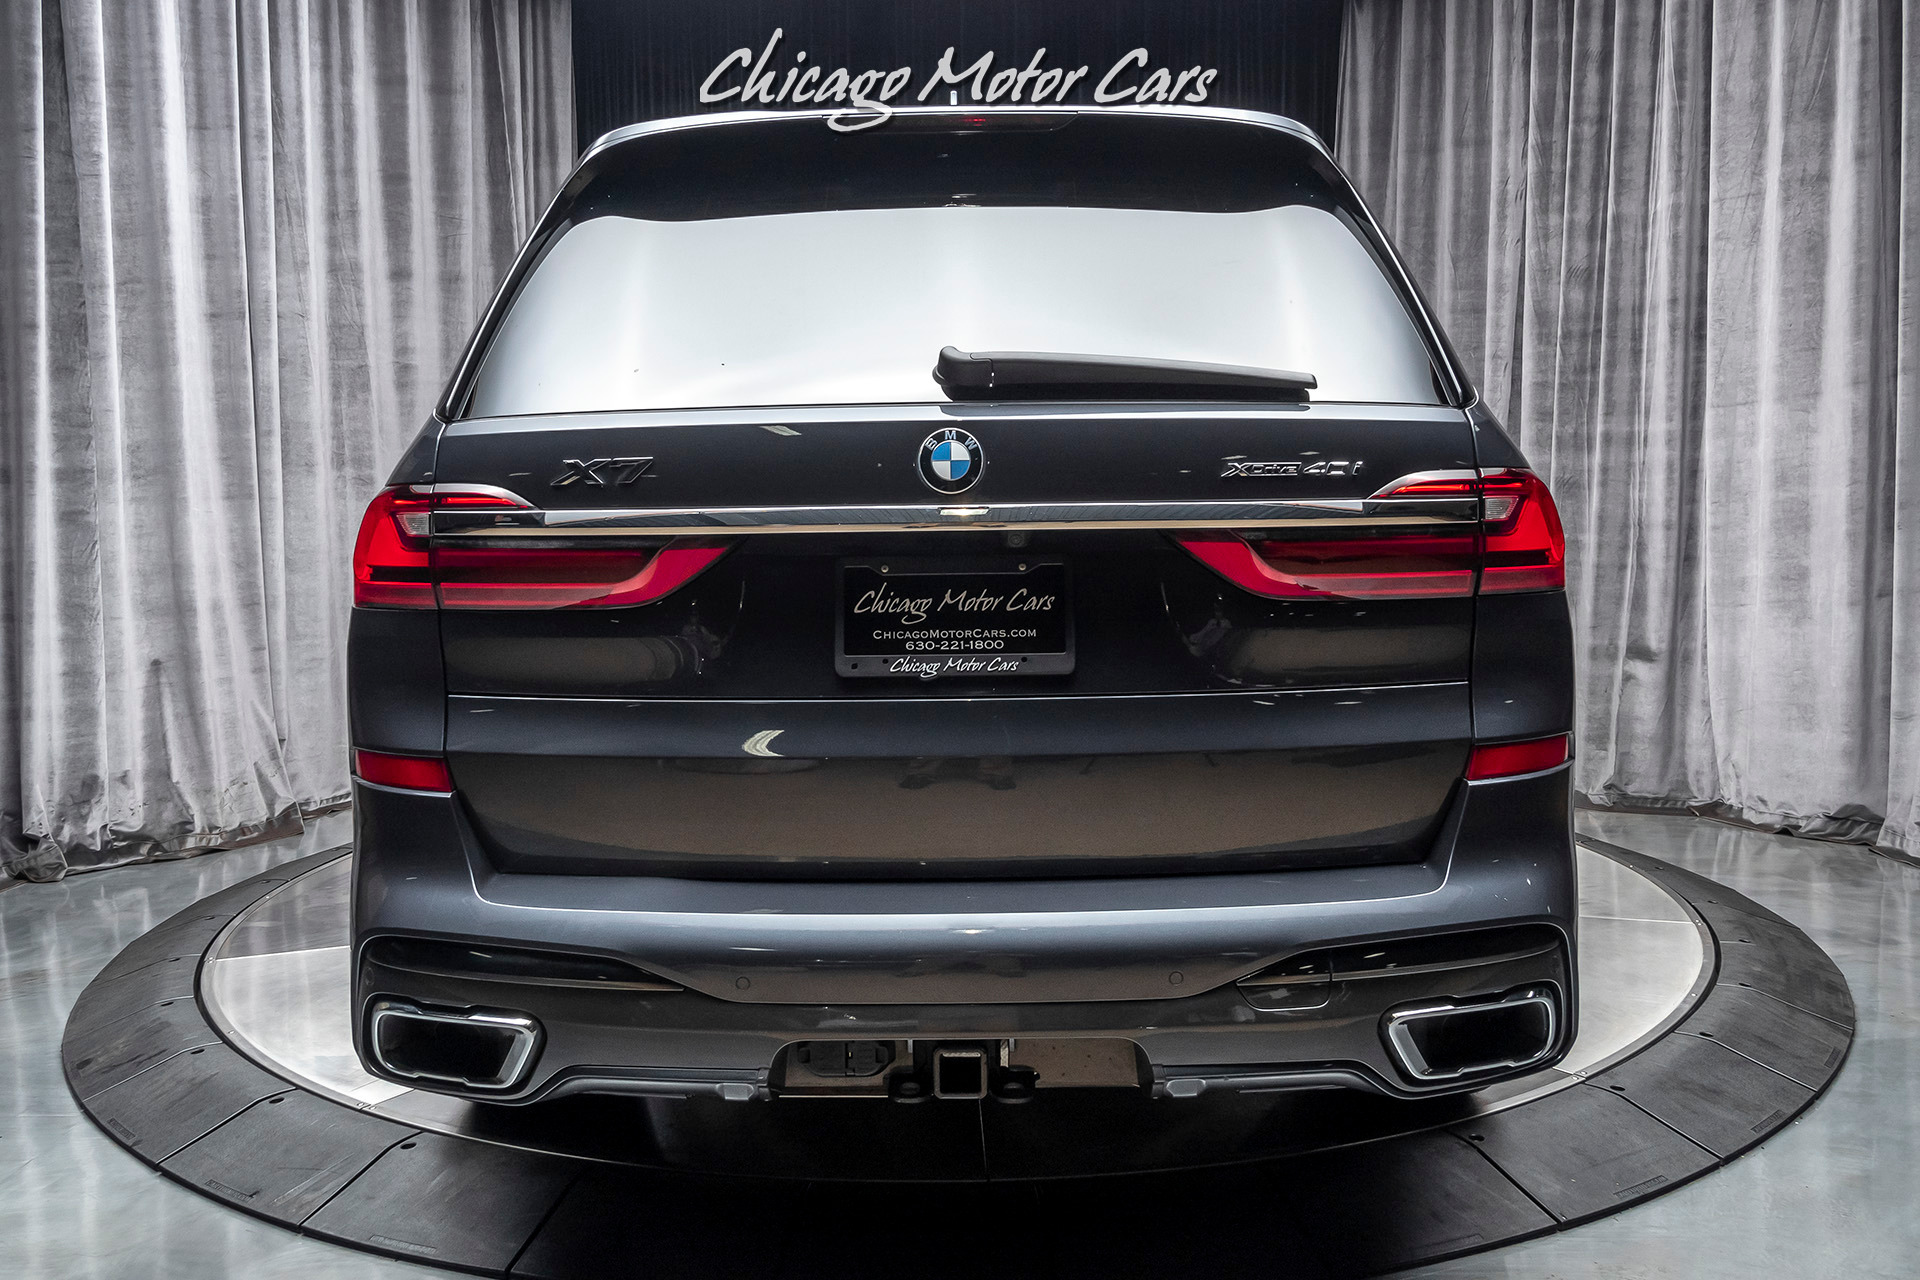 Used-2019-BMW-X7-xDrive40i-M-Sport-Package-MSRP-89995-LOADED-PREMIUM-PACKAGE